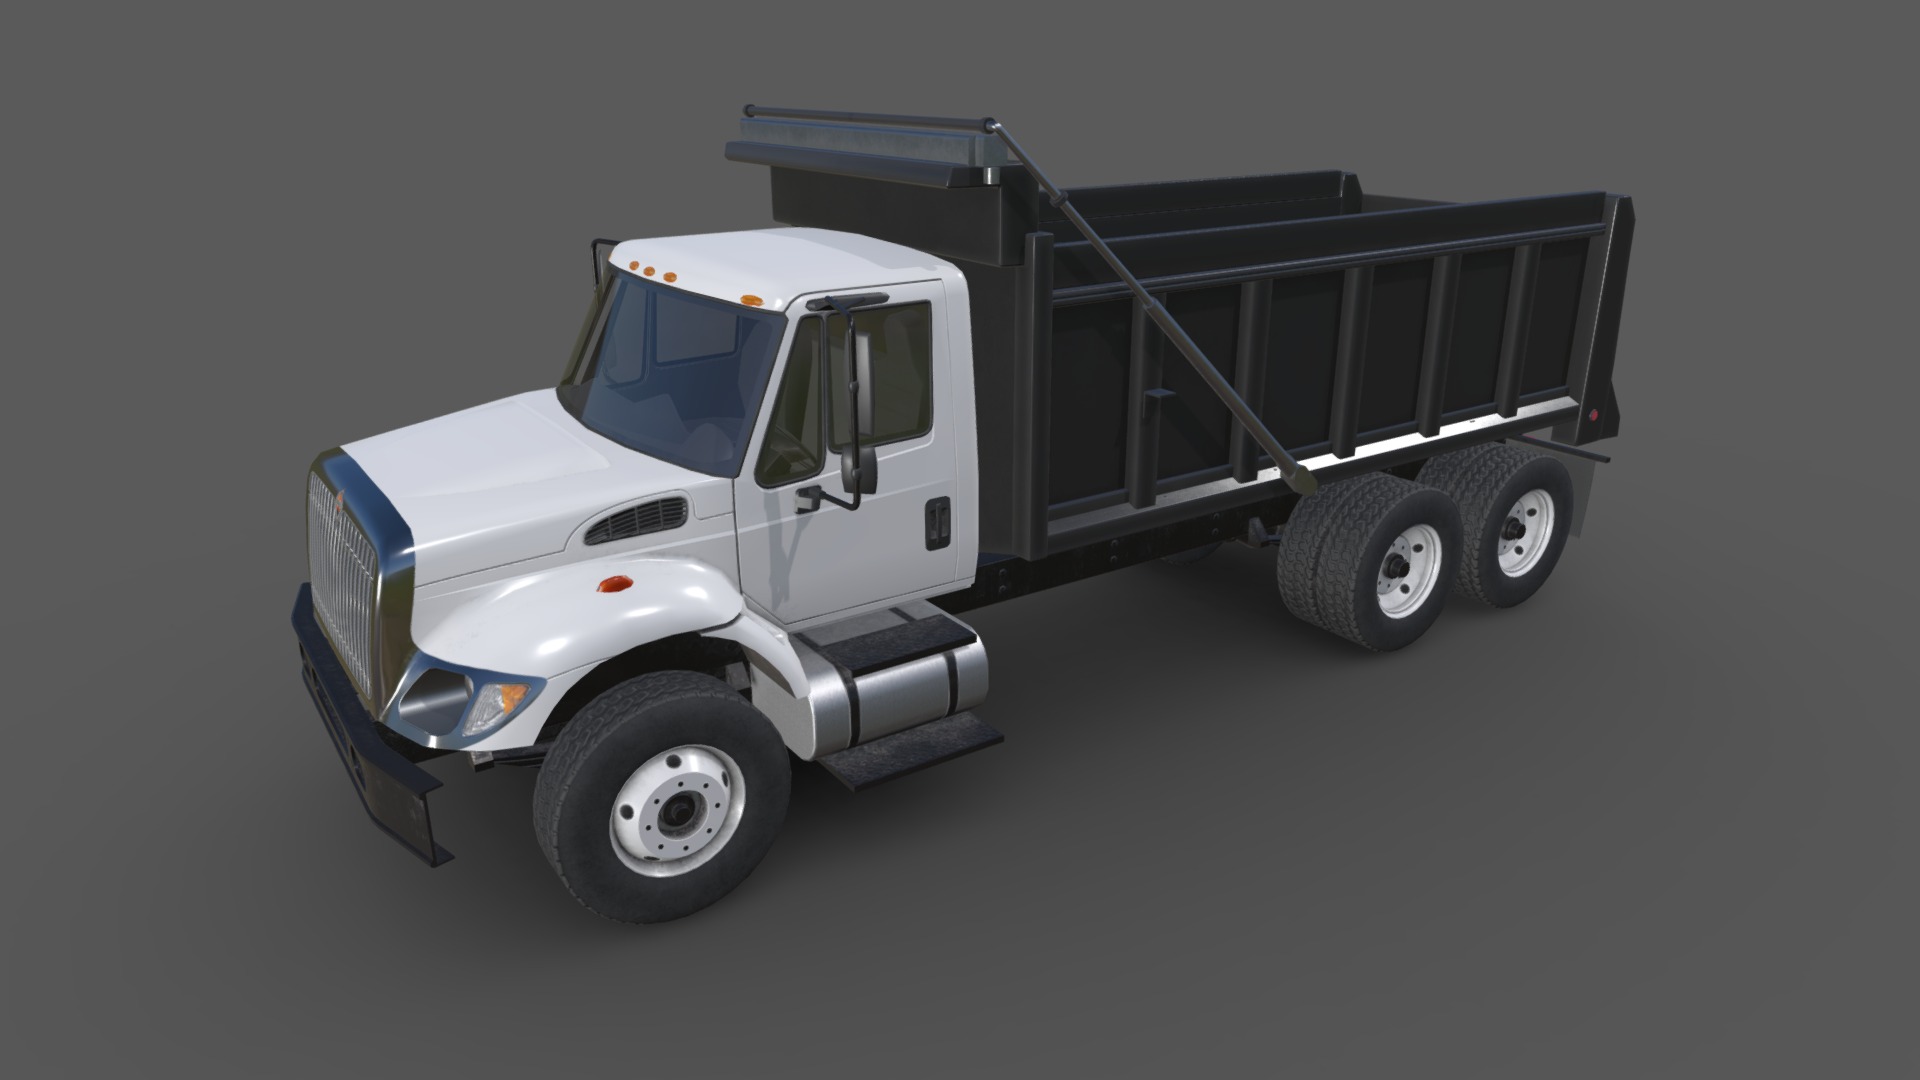 3D model International 7400 Dump Truck - This is a 3D model of the International 7400 Dump Truck. The 3D model is about a white truck with a trailer.